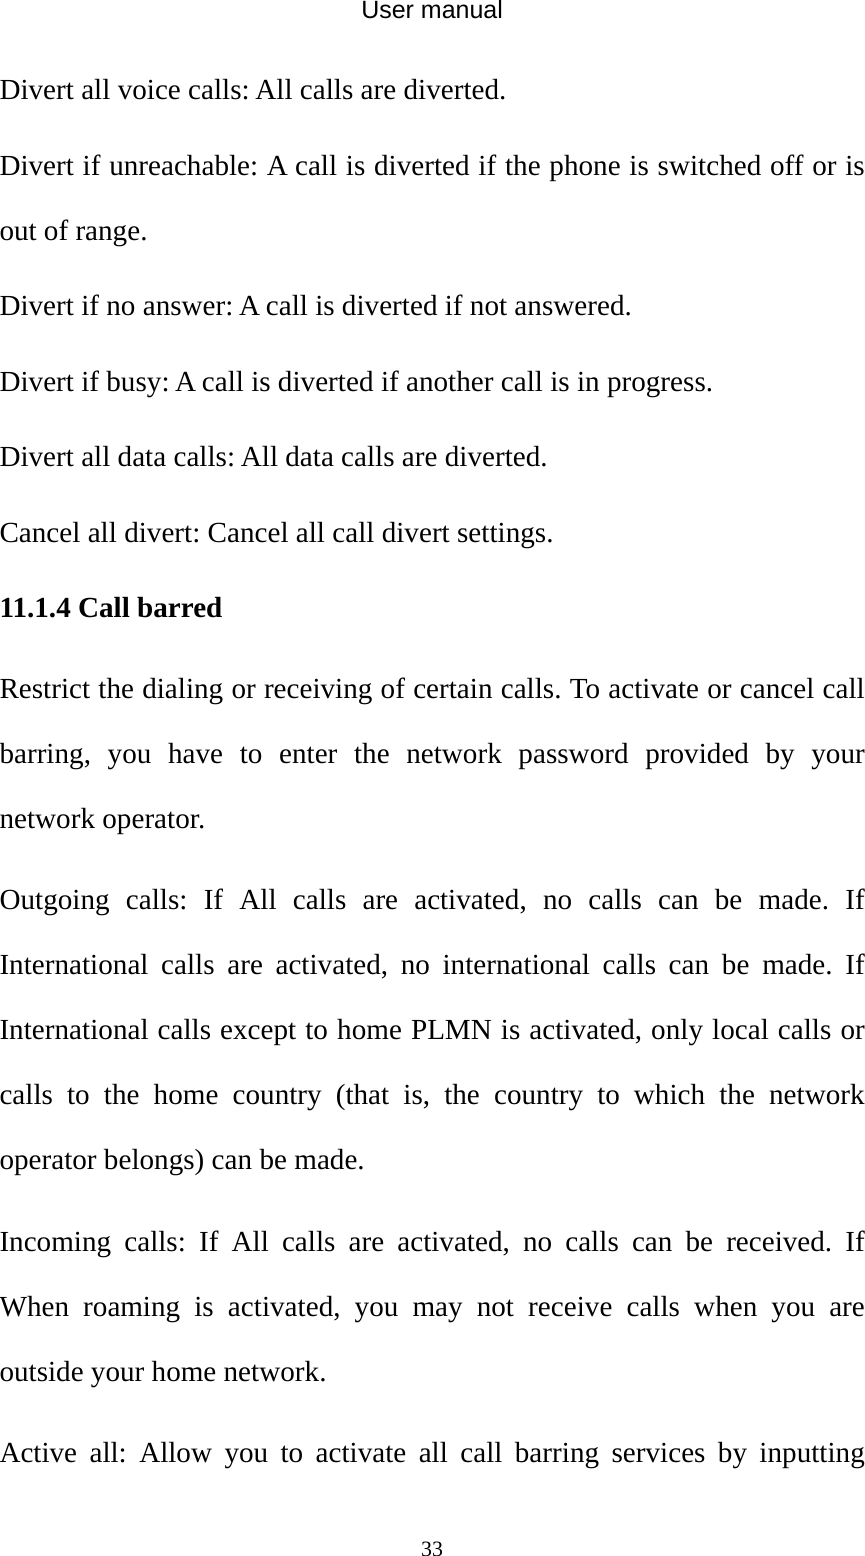 User manual  33Divert all voice calls: All calls are diverted. Divert if unreachable: A call is diverted if the phone is switched off or is out of range. Divert if no answer: A call is diverted if not answered. Divert if busy: A call is diverted if another call is in progress. Divert all data calls: All data calls are diverted. Cancel all divert: Cancel all call divert settings. 11.1.4 Call barred Restrict the dialing or receiving of certain calls. To activate or cancel call barring, you have to enter the network password provided by your network operator. Outgoing calls: If All calls are activated, no calls can be made. If International calls are activated, no international calls can be made. If International calls except to home PLMN is activated, only local calls or calls to the home country (that is, the country to which the network operator belongs) can be made. Incoming calls: If All calls are activated, no calls can be received. If When roaming is activated, you may not receive calls when you are outside your home network. Active all: Allow you to activate all call barring services by inputting 